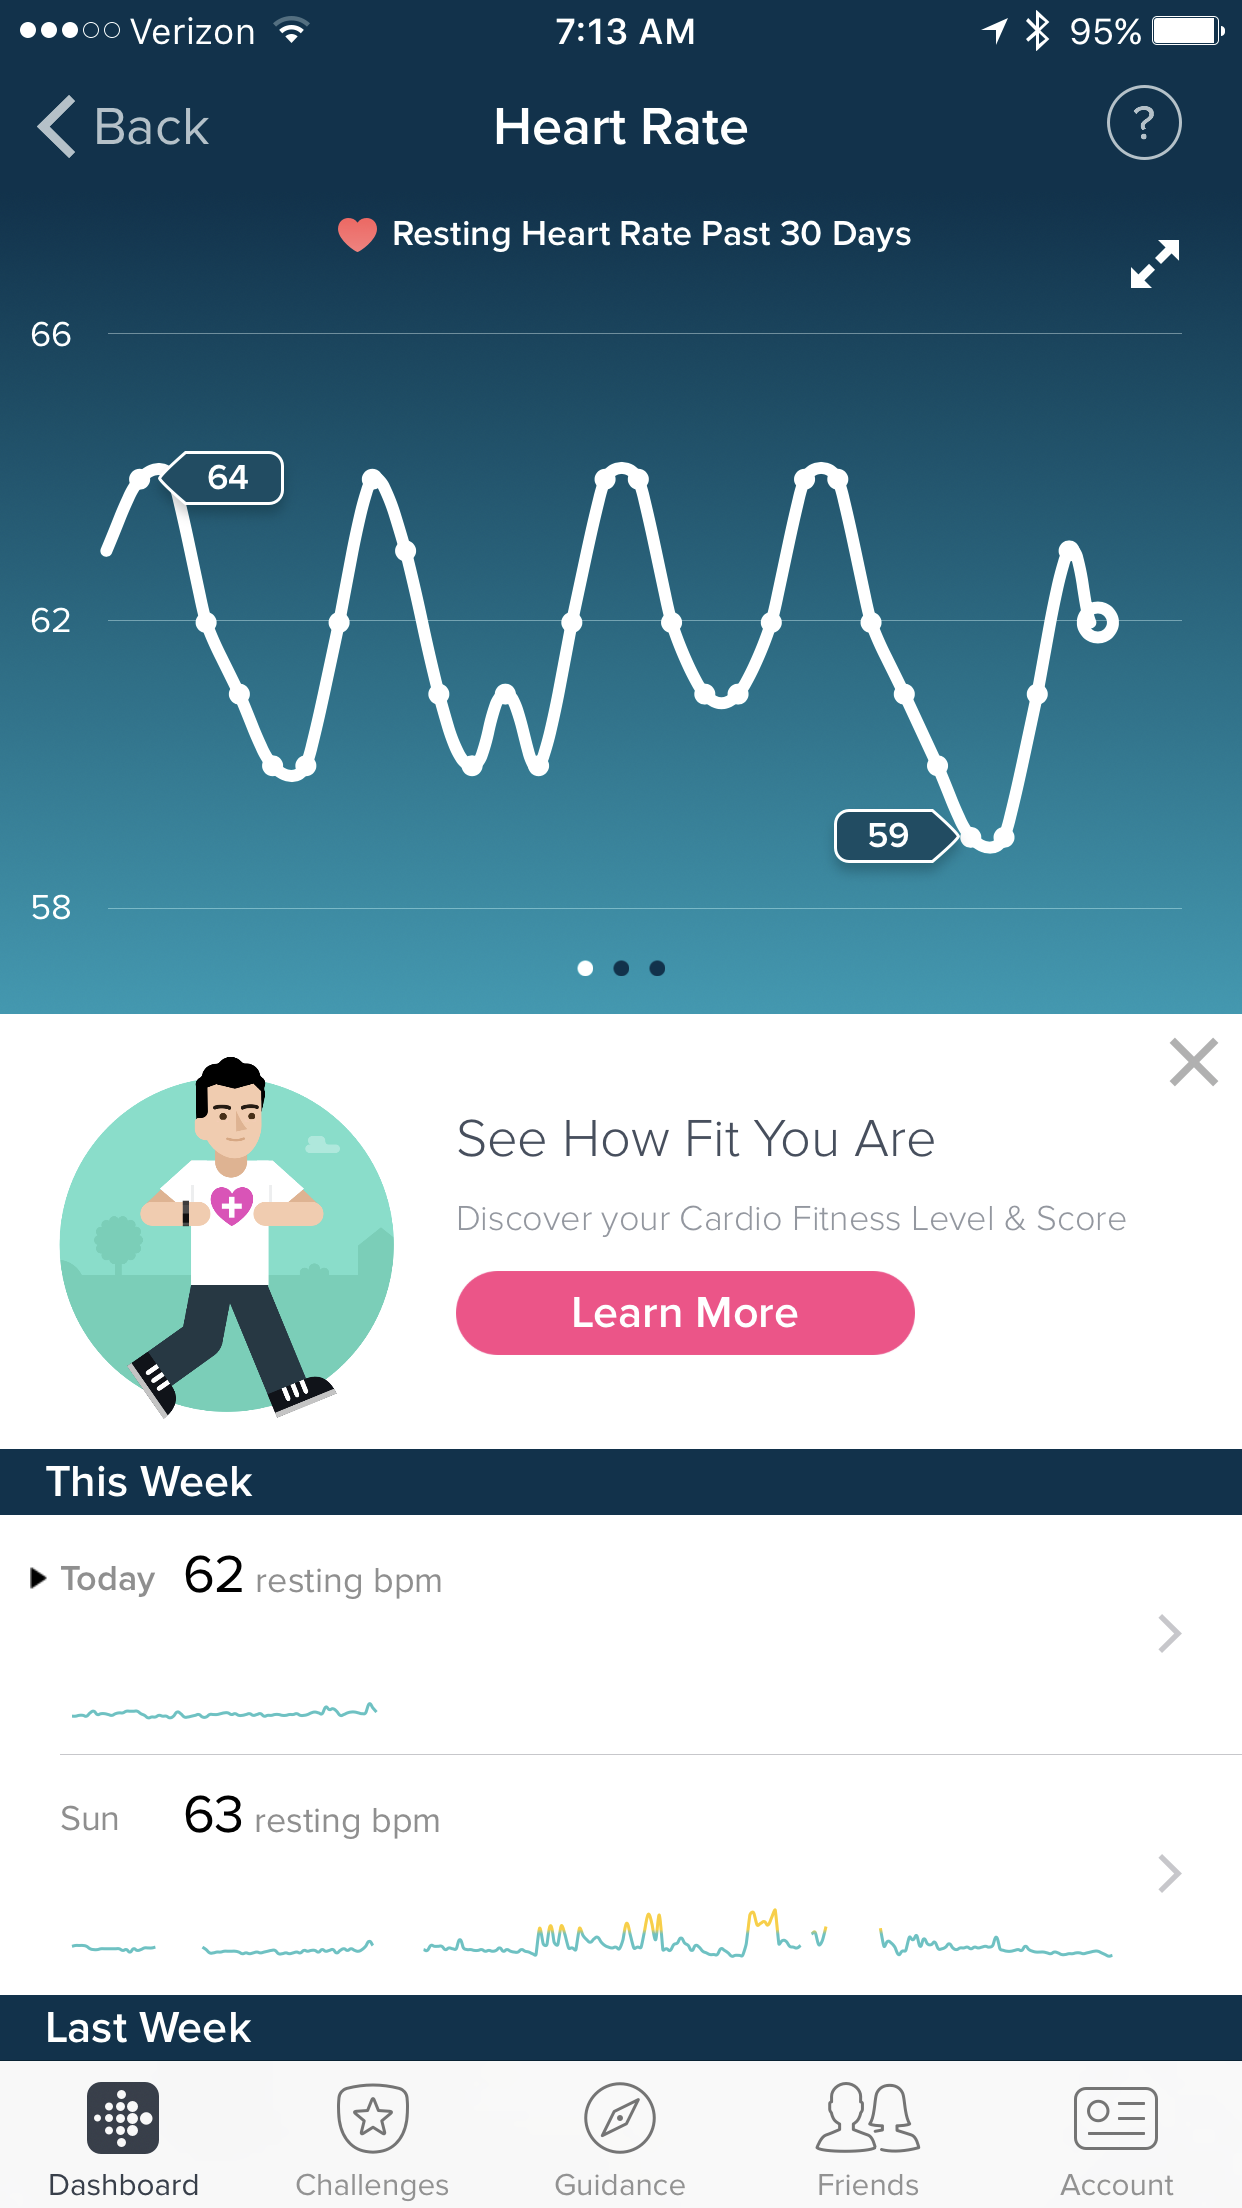 Solved: Heart rate day after drinking alcohol